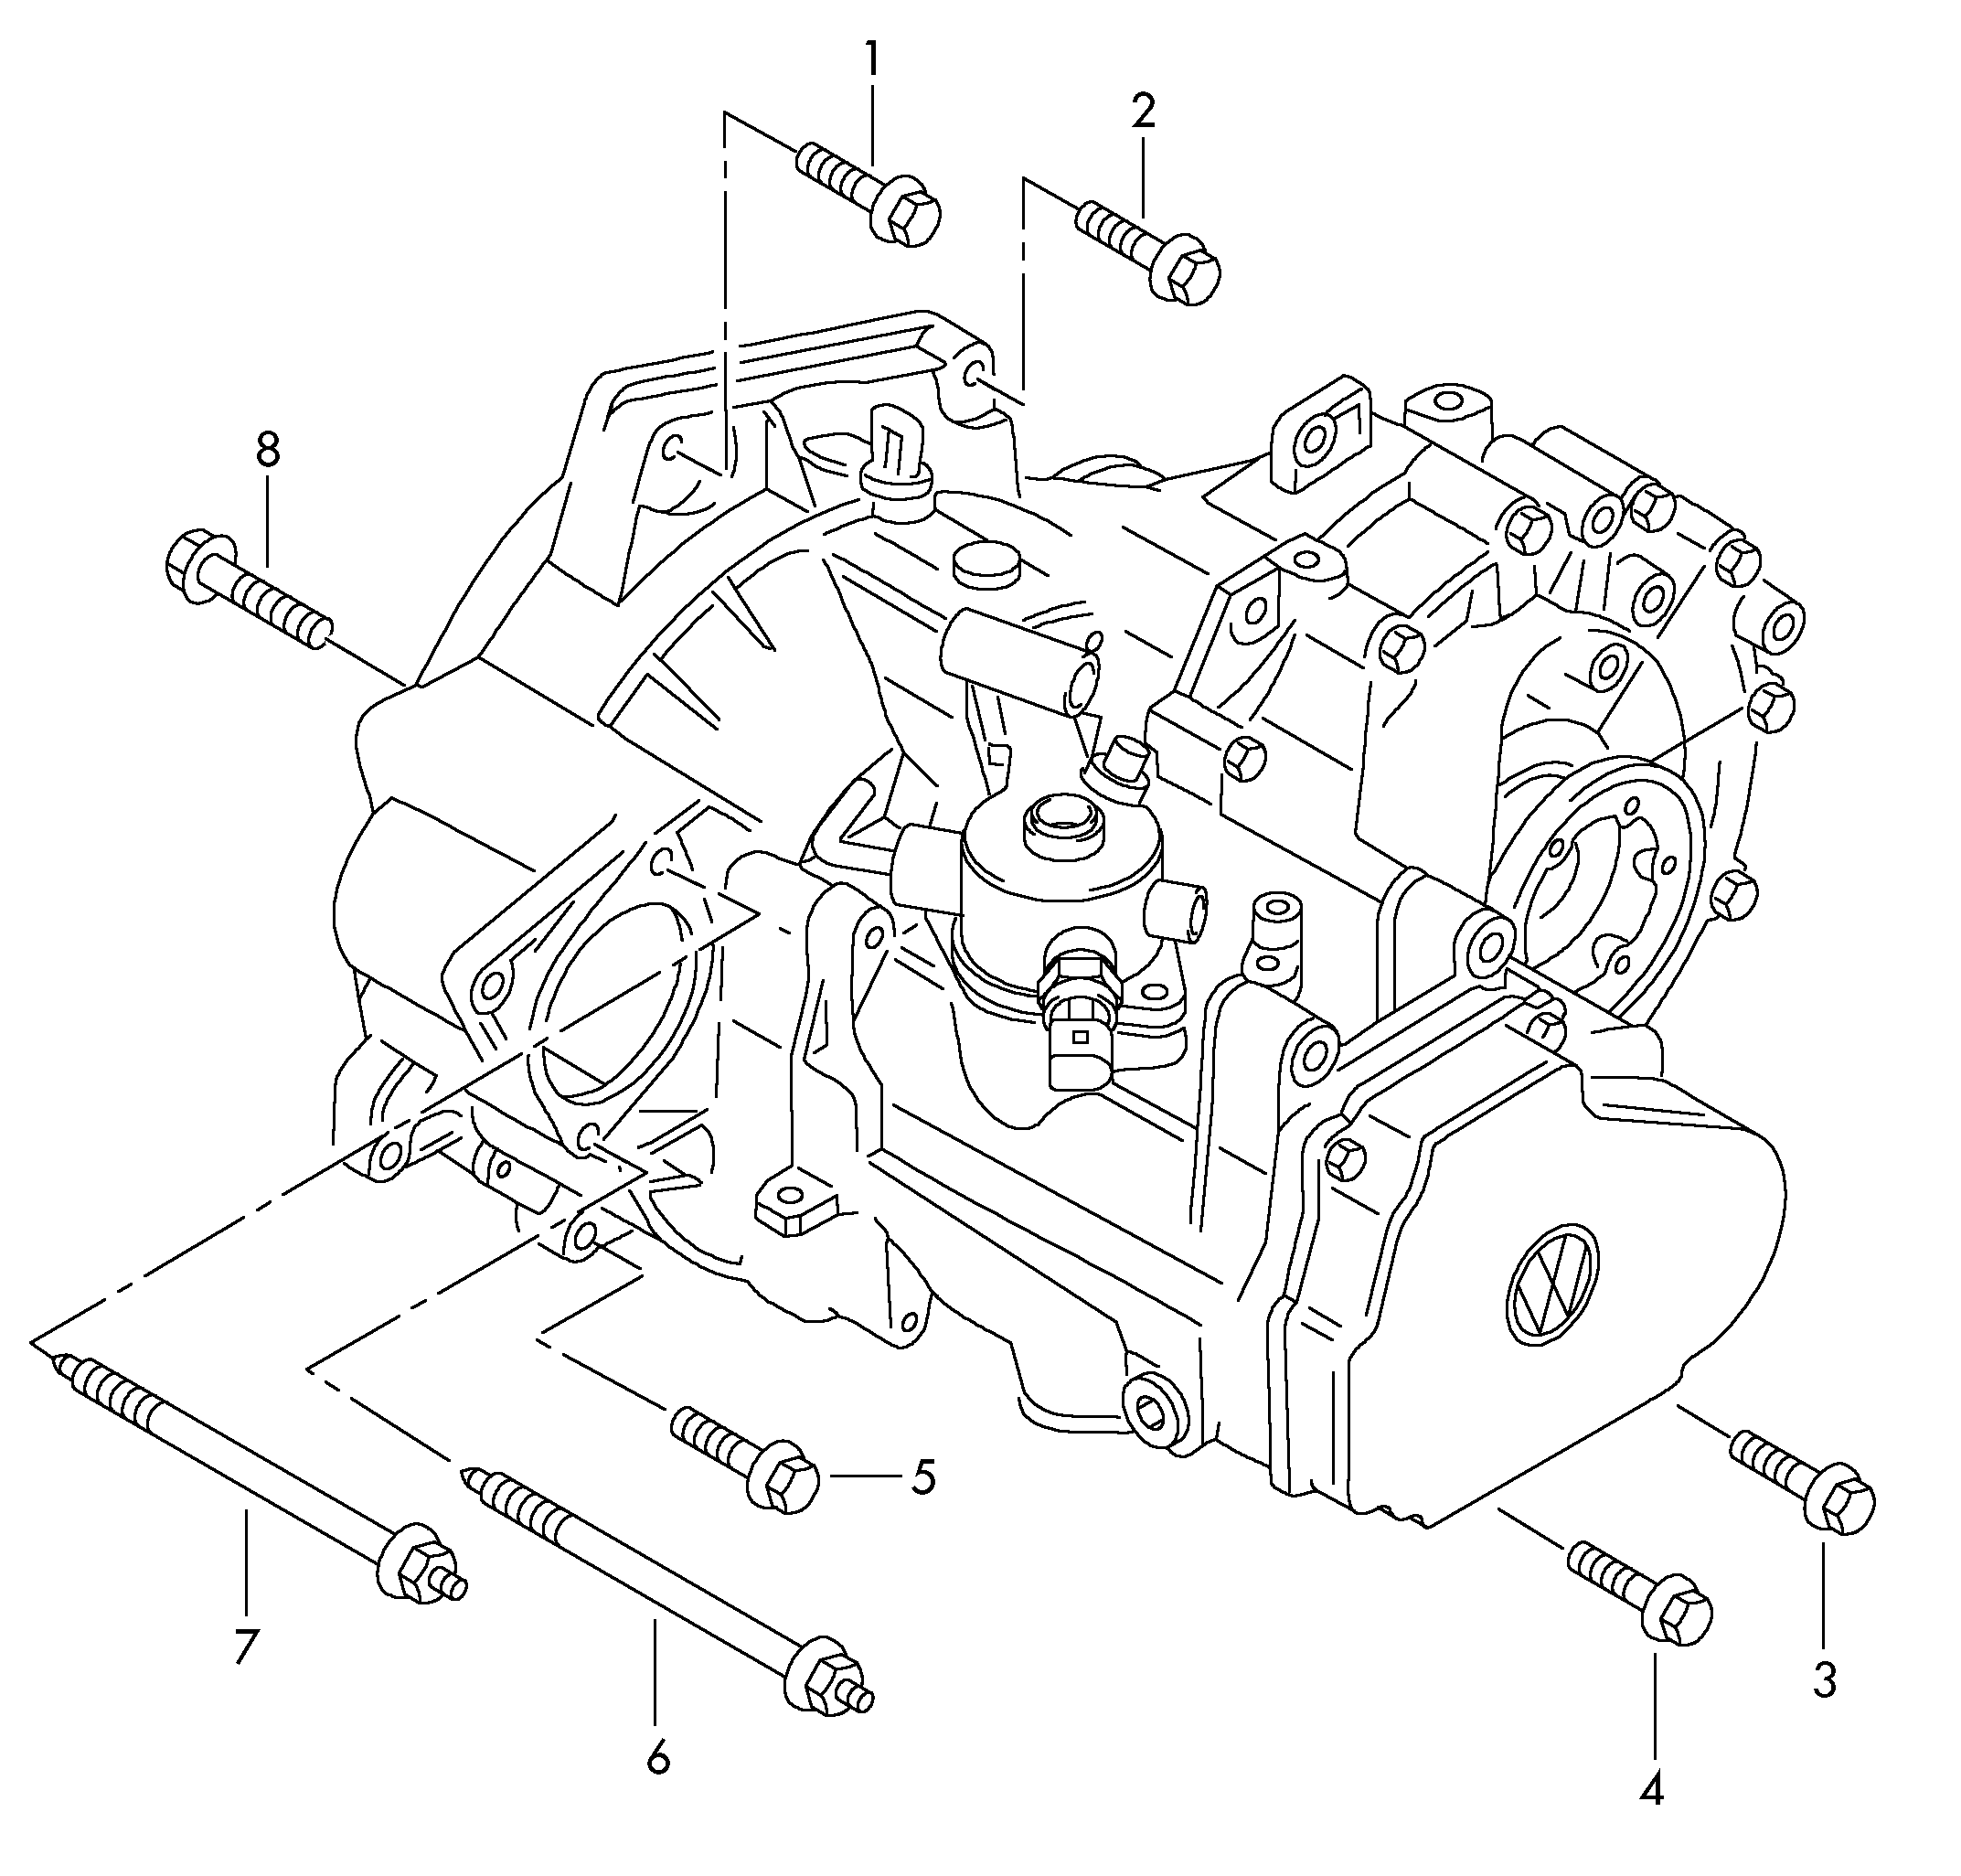 mounting parts for engine and<br>transmissionfor 5 speed manual transmiss. MQ250 - Octavia - oct